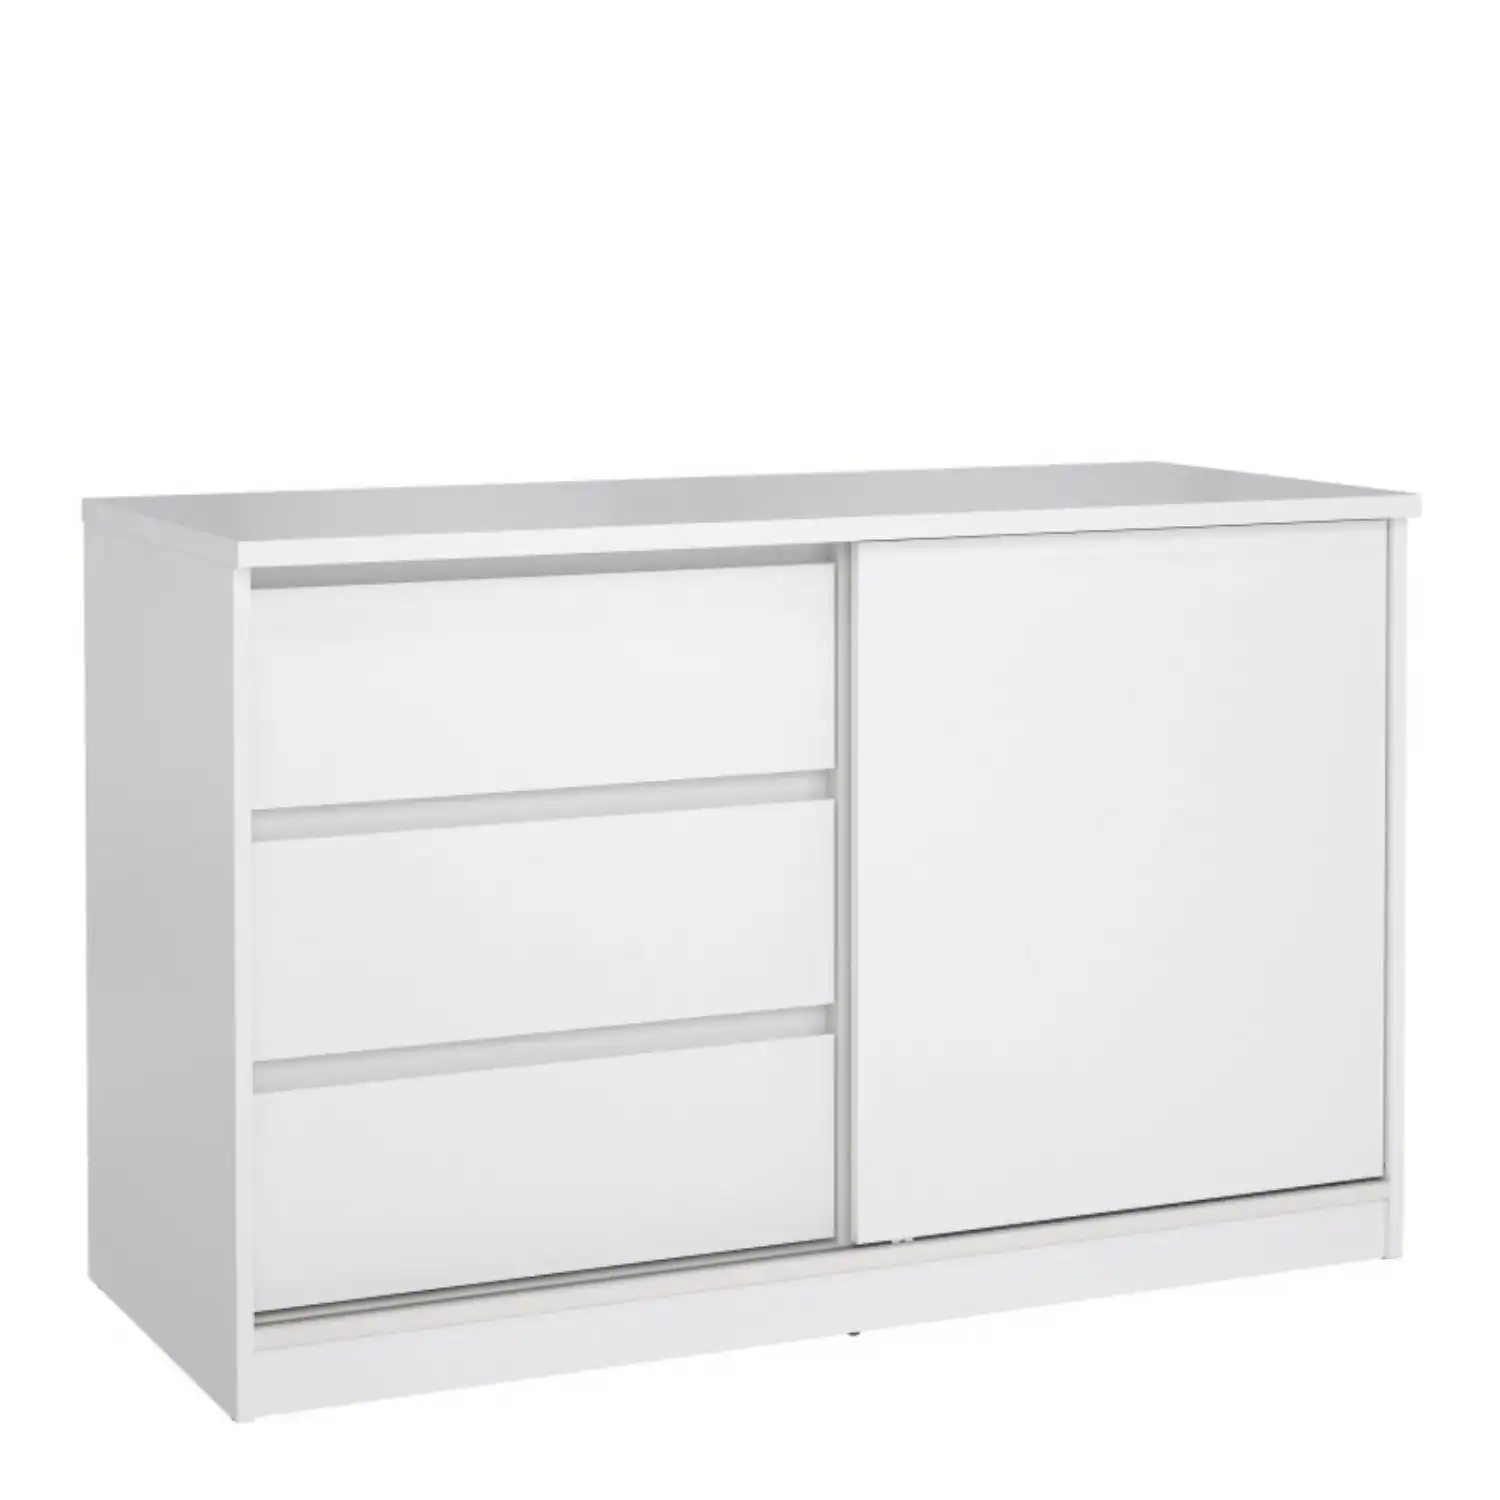 Storage Unit with 1 Sliding Door and 3 Drawers in White High Gloss